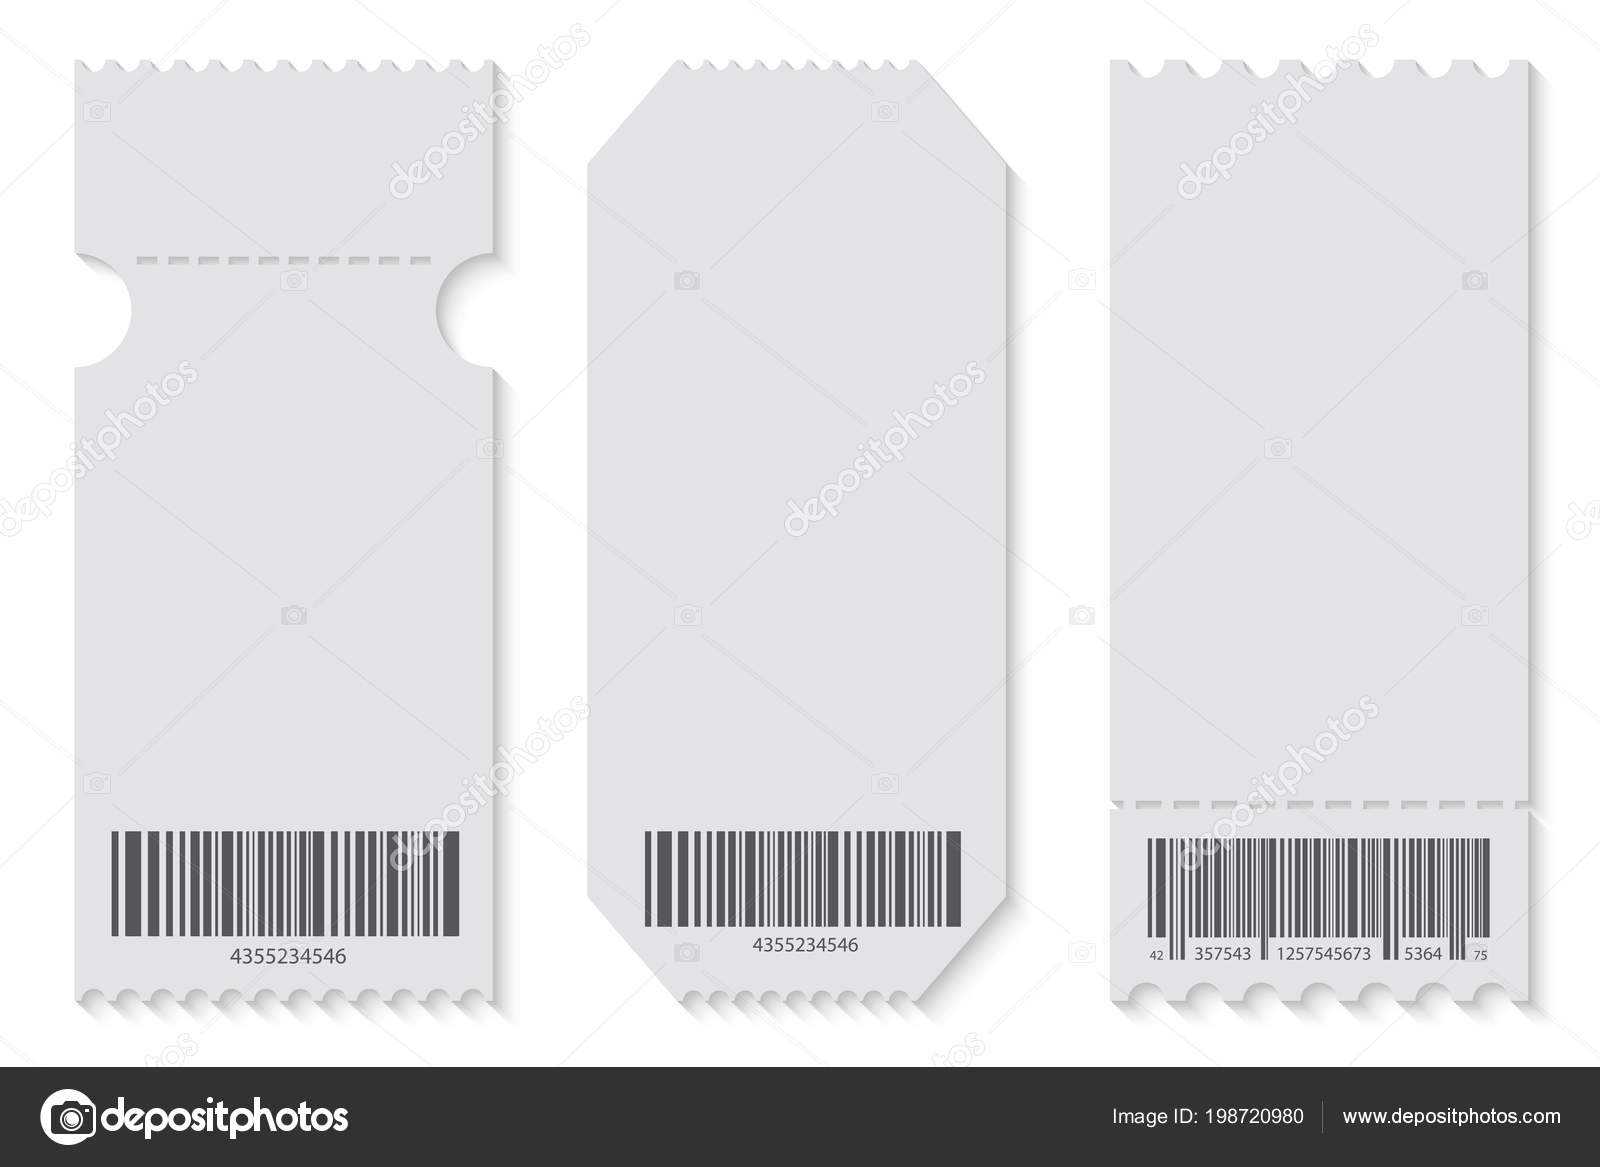 Creative Vector Illustration Of Empty Ticket Template Mockup Throughout Blank Train Ticket Template